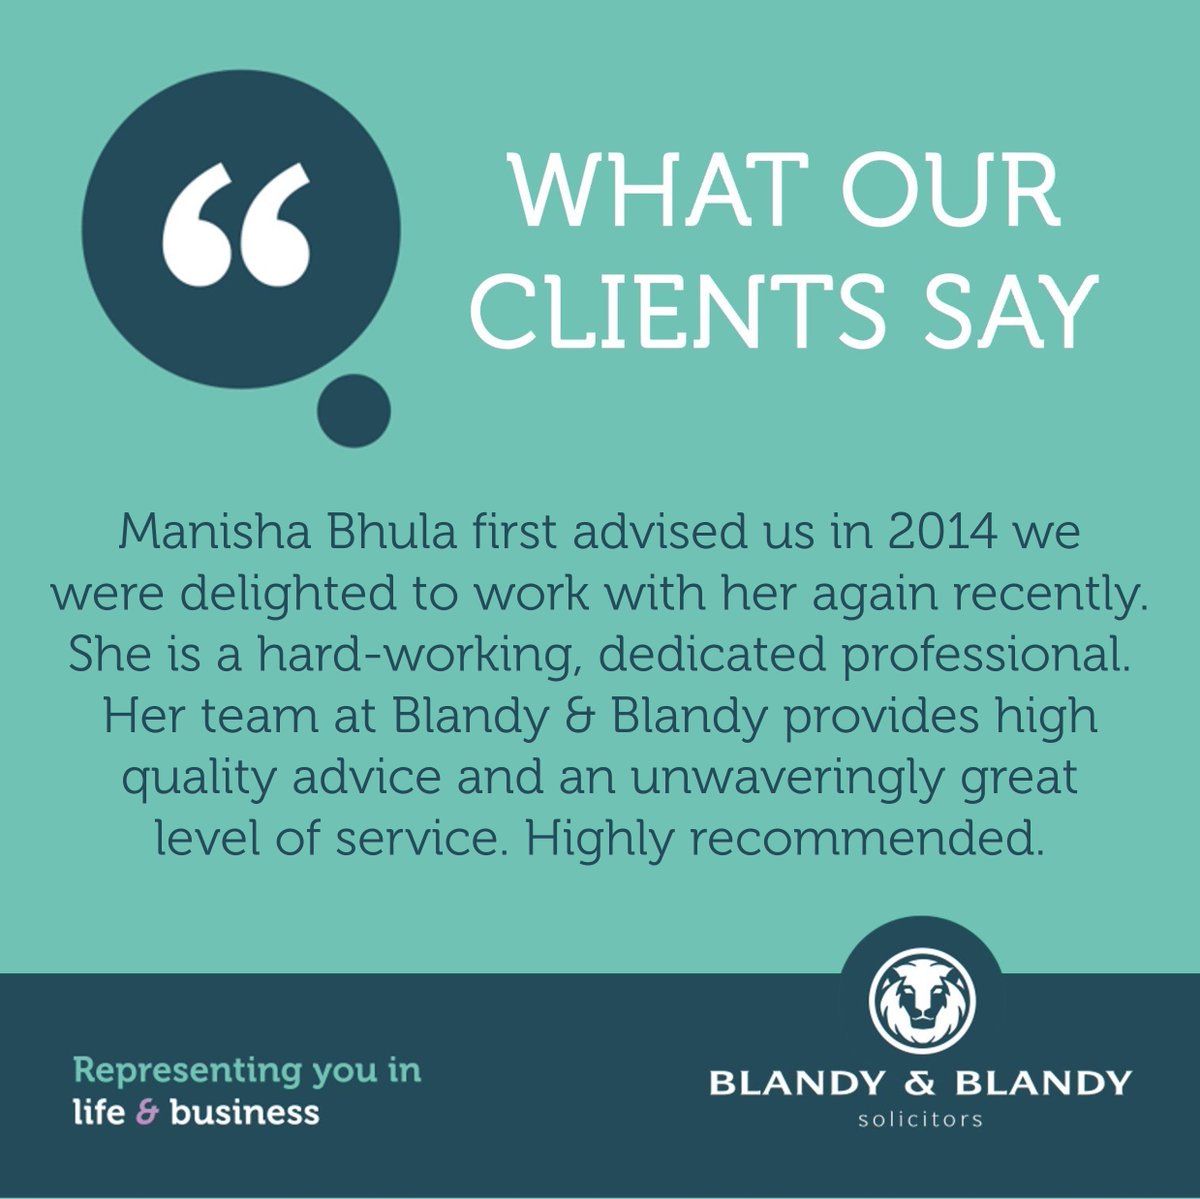 Well done to partner Manisha Bhula, in our Residential Property team in Wokingham, on this excellent feedback and five-star review kindly received from a client.

⭐⭐⭐⭐⭐

#clientfeedback #clientexperience